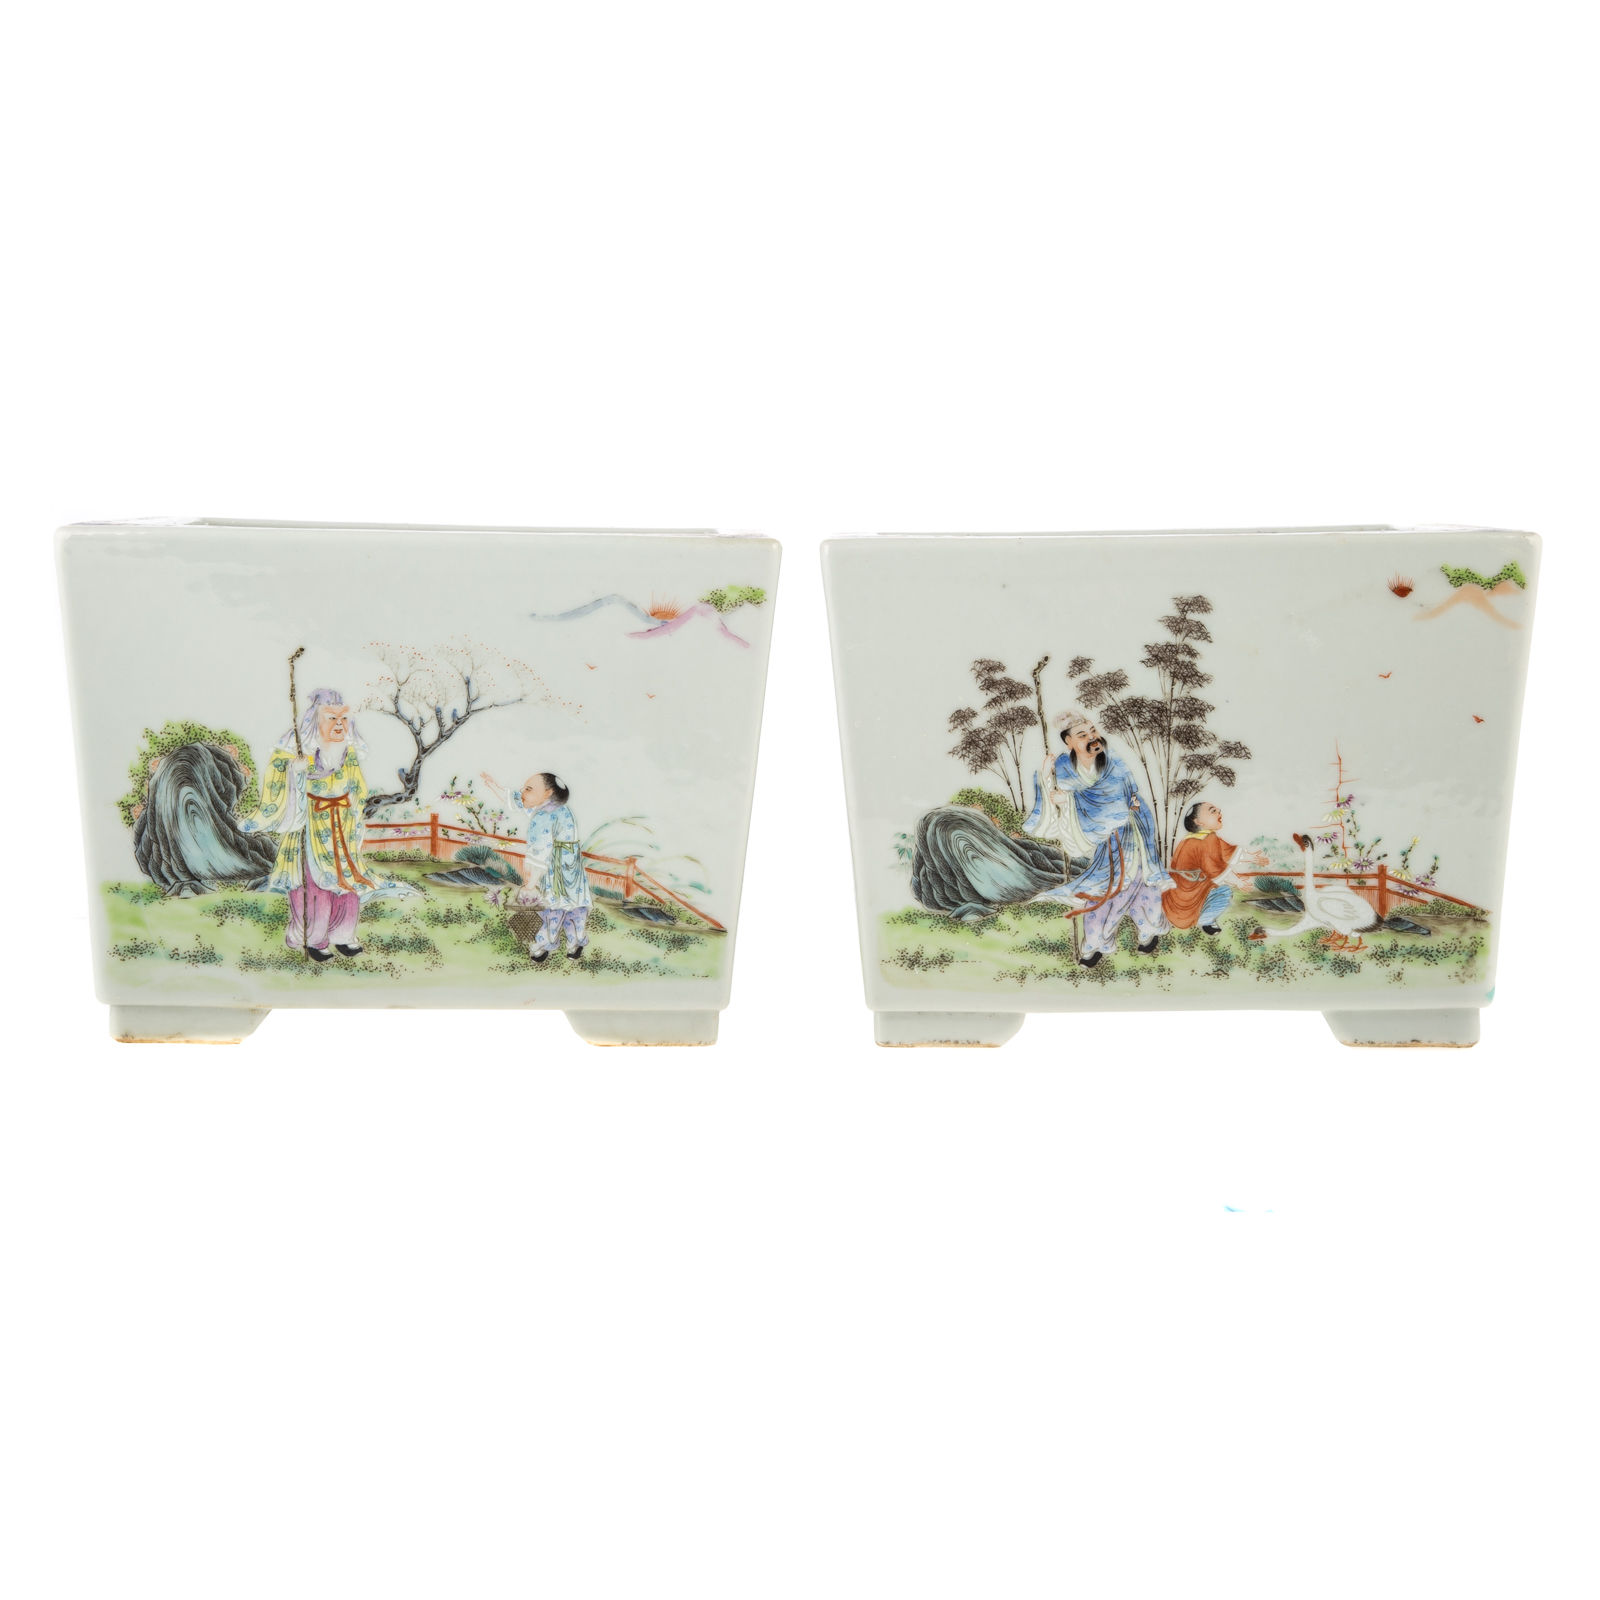 A PAIR OF CHINESE POLYCHROME PORCELAIN